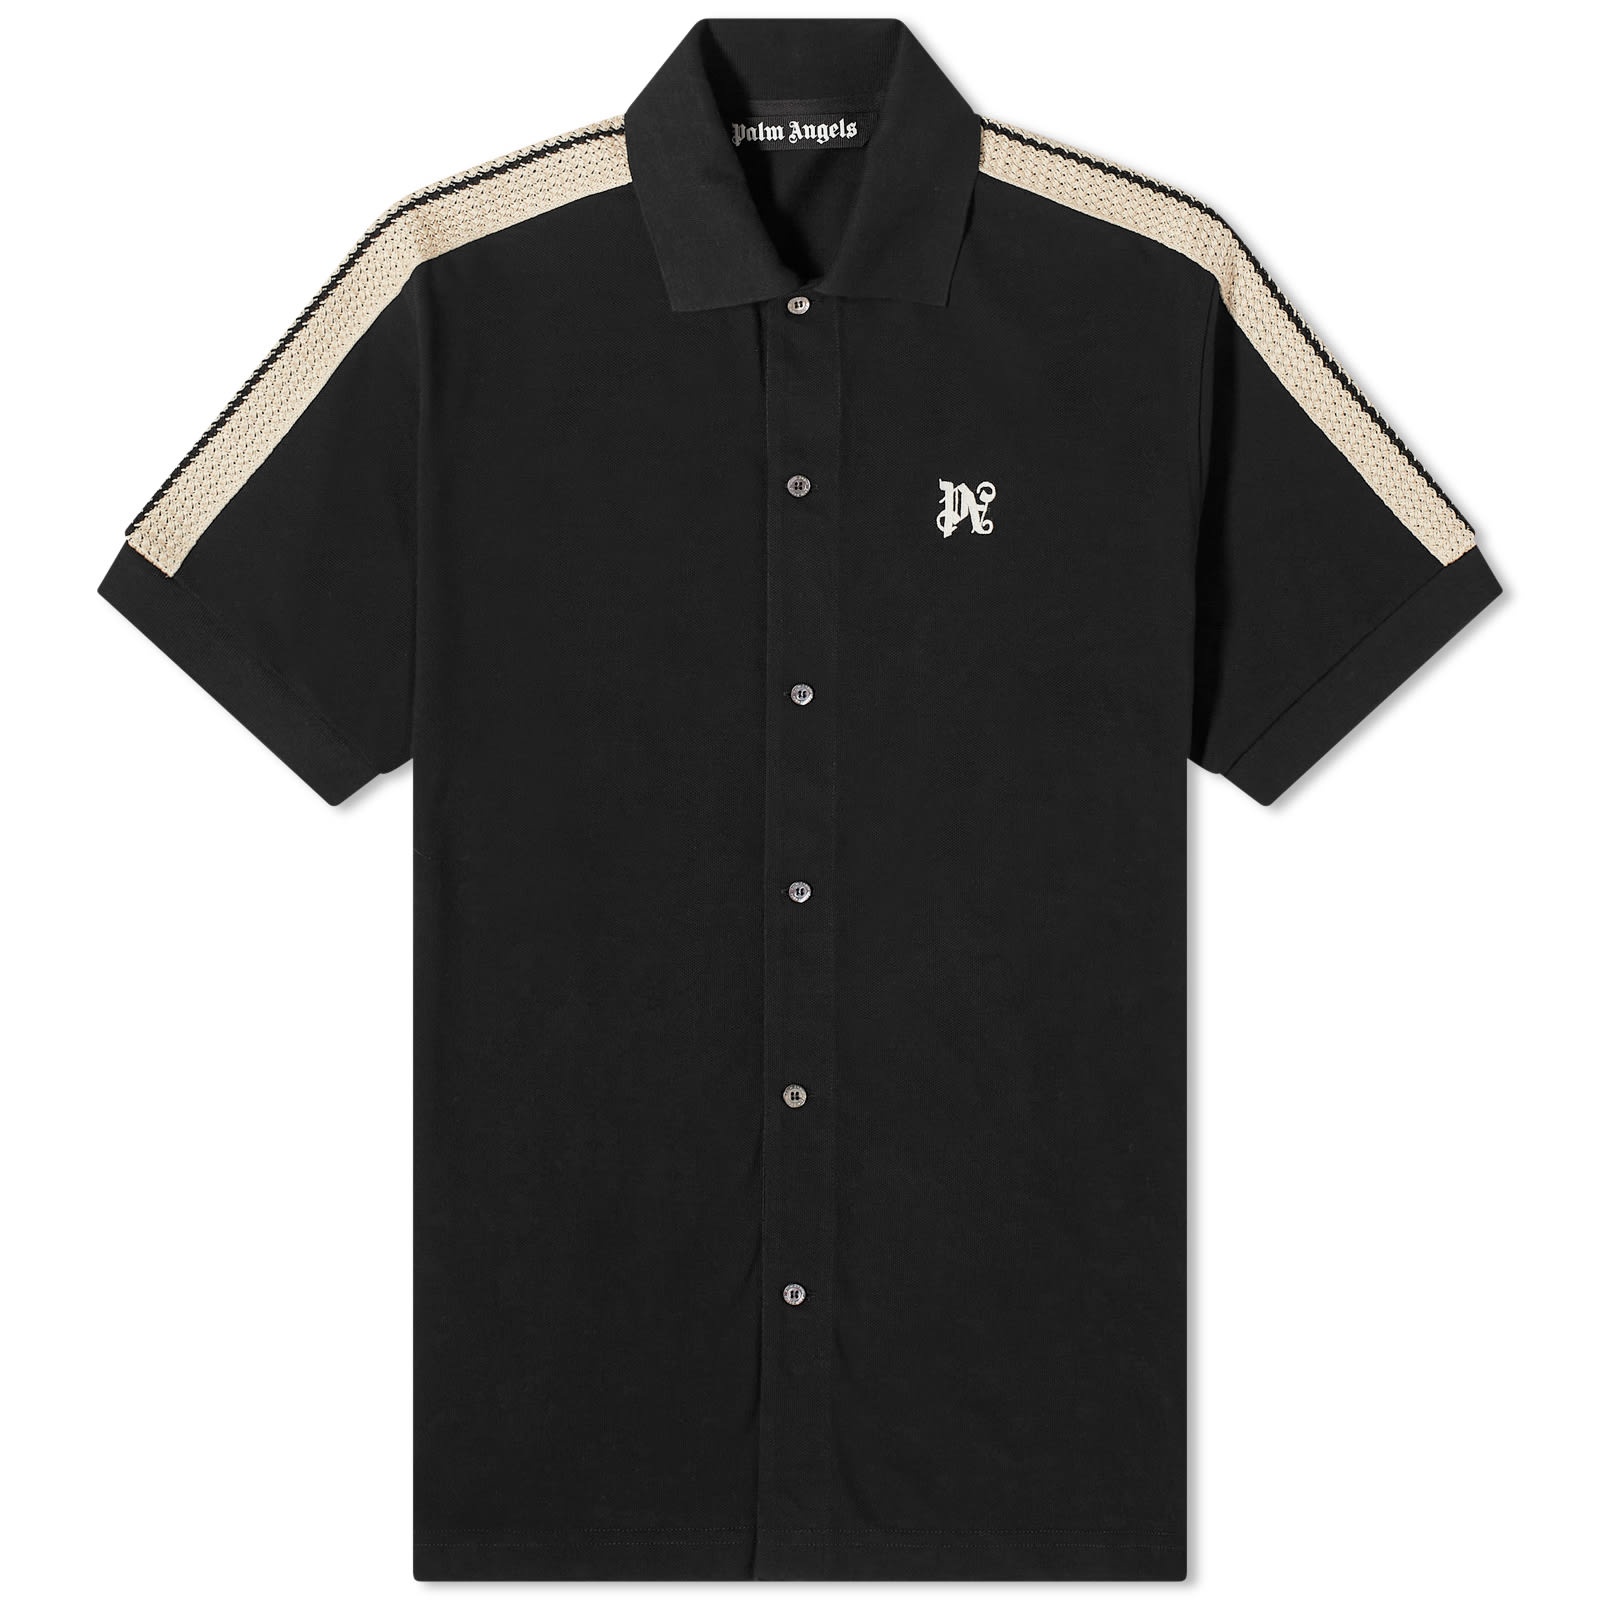 Palm Angels Monogram Taping Button Down Shirt - 1